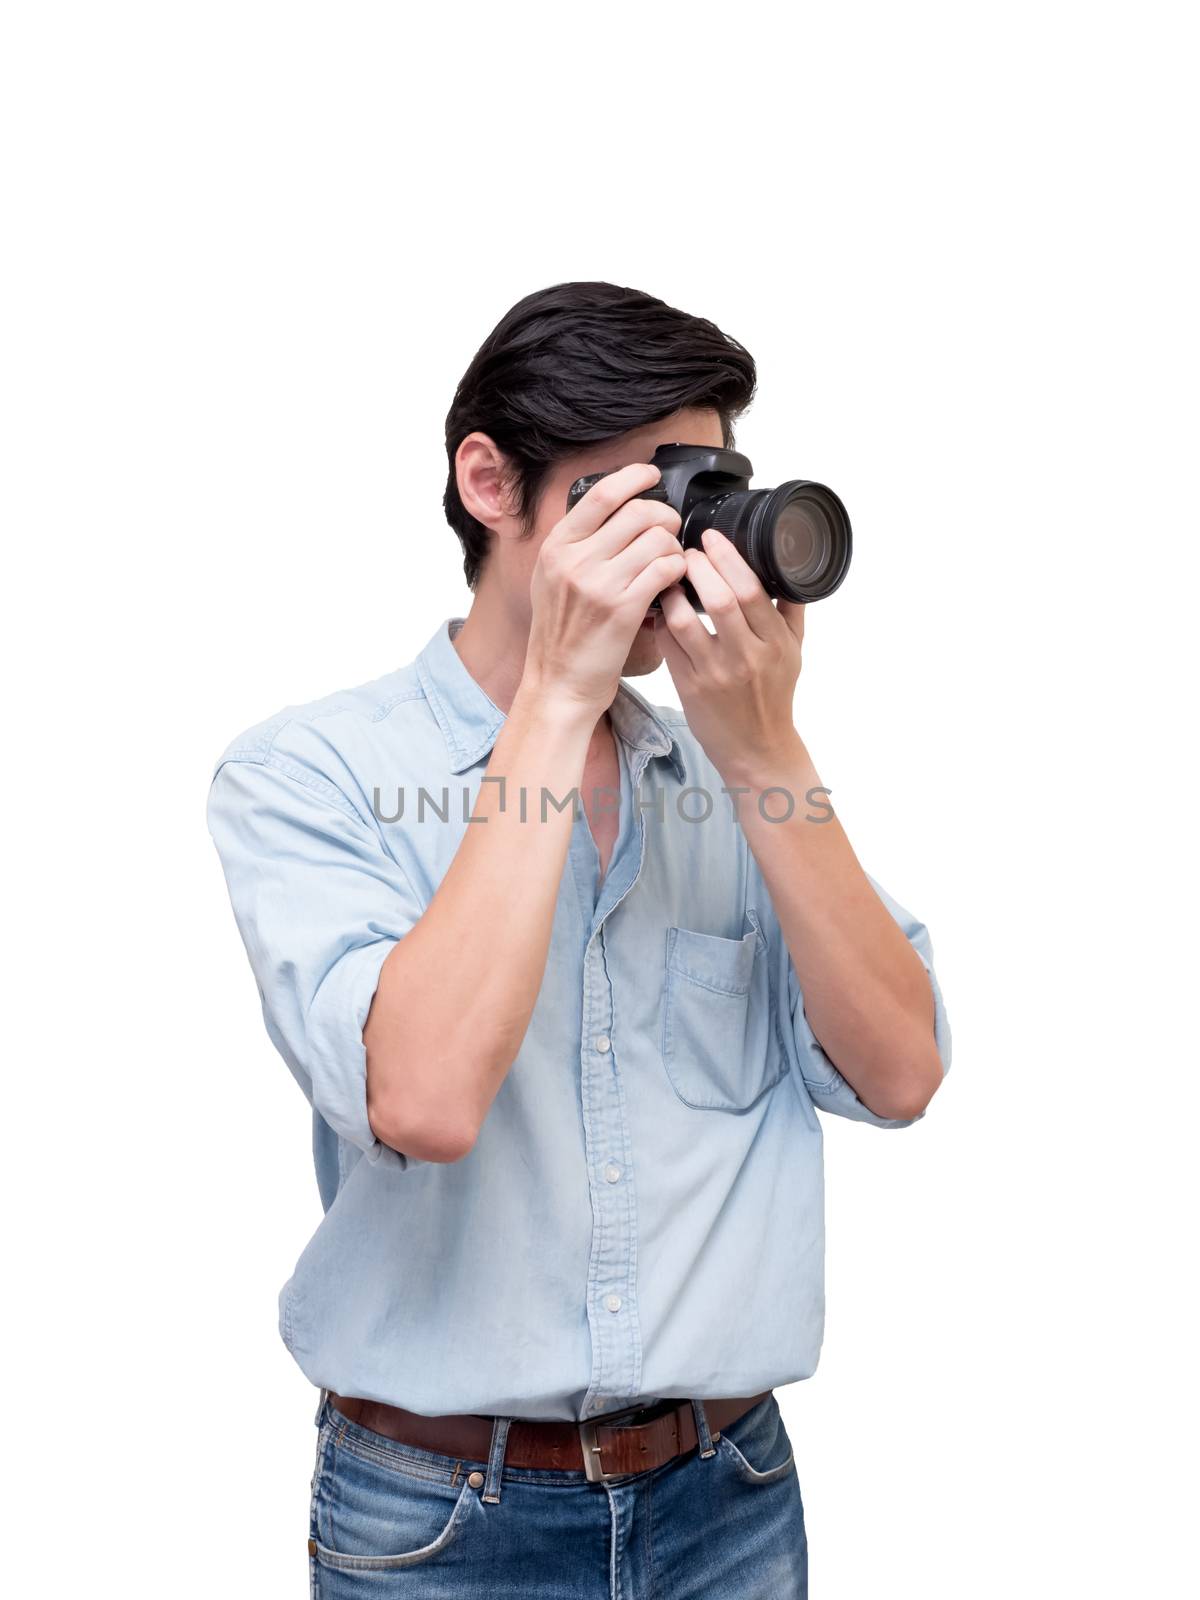 Young Asian man with camera isolated on white background. Photographer concept